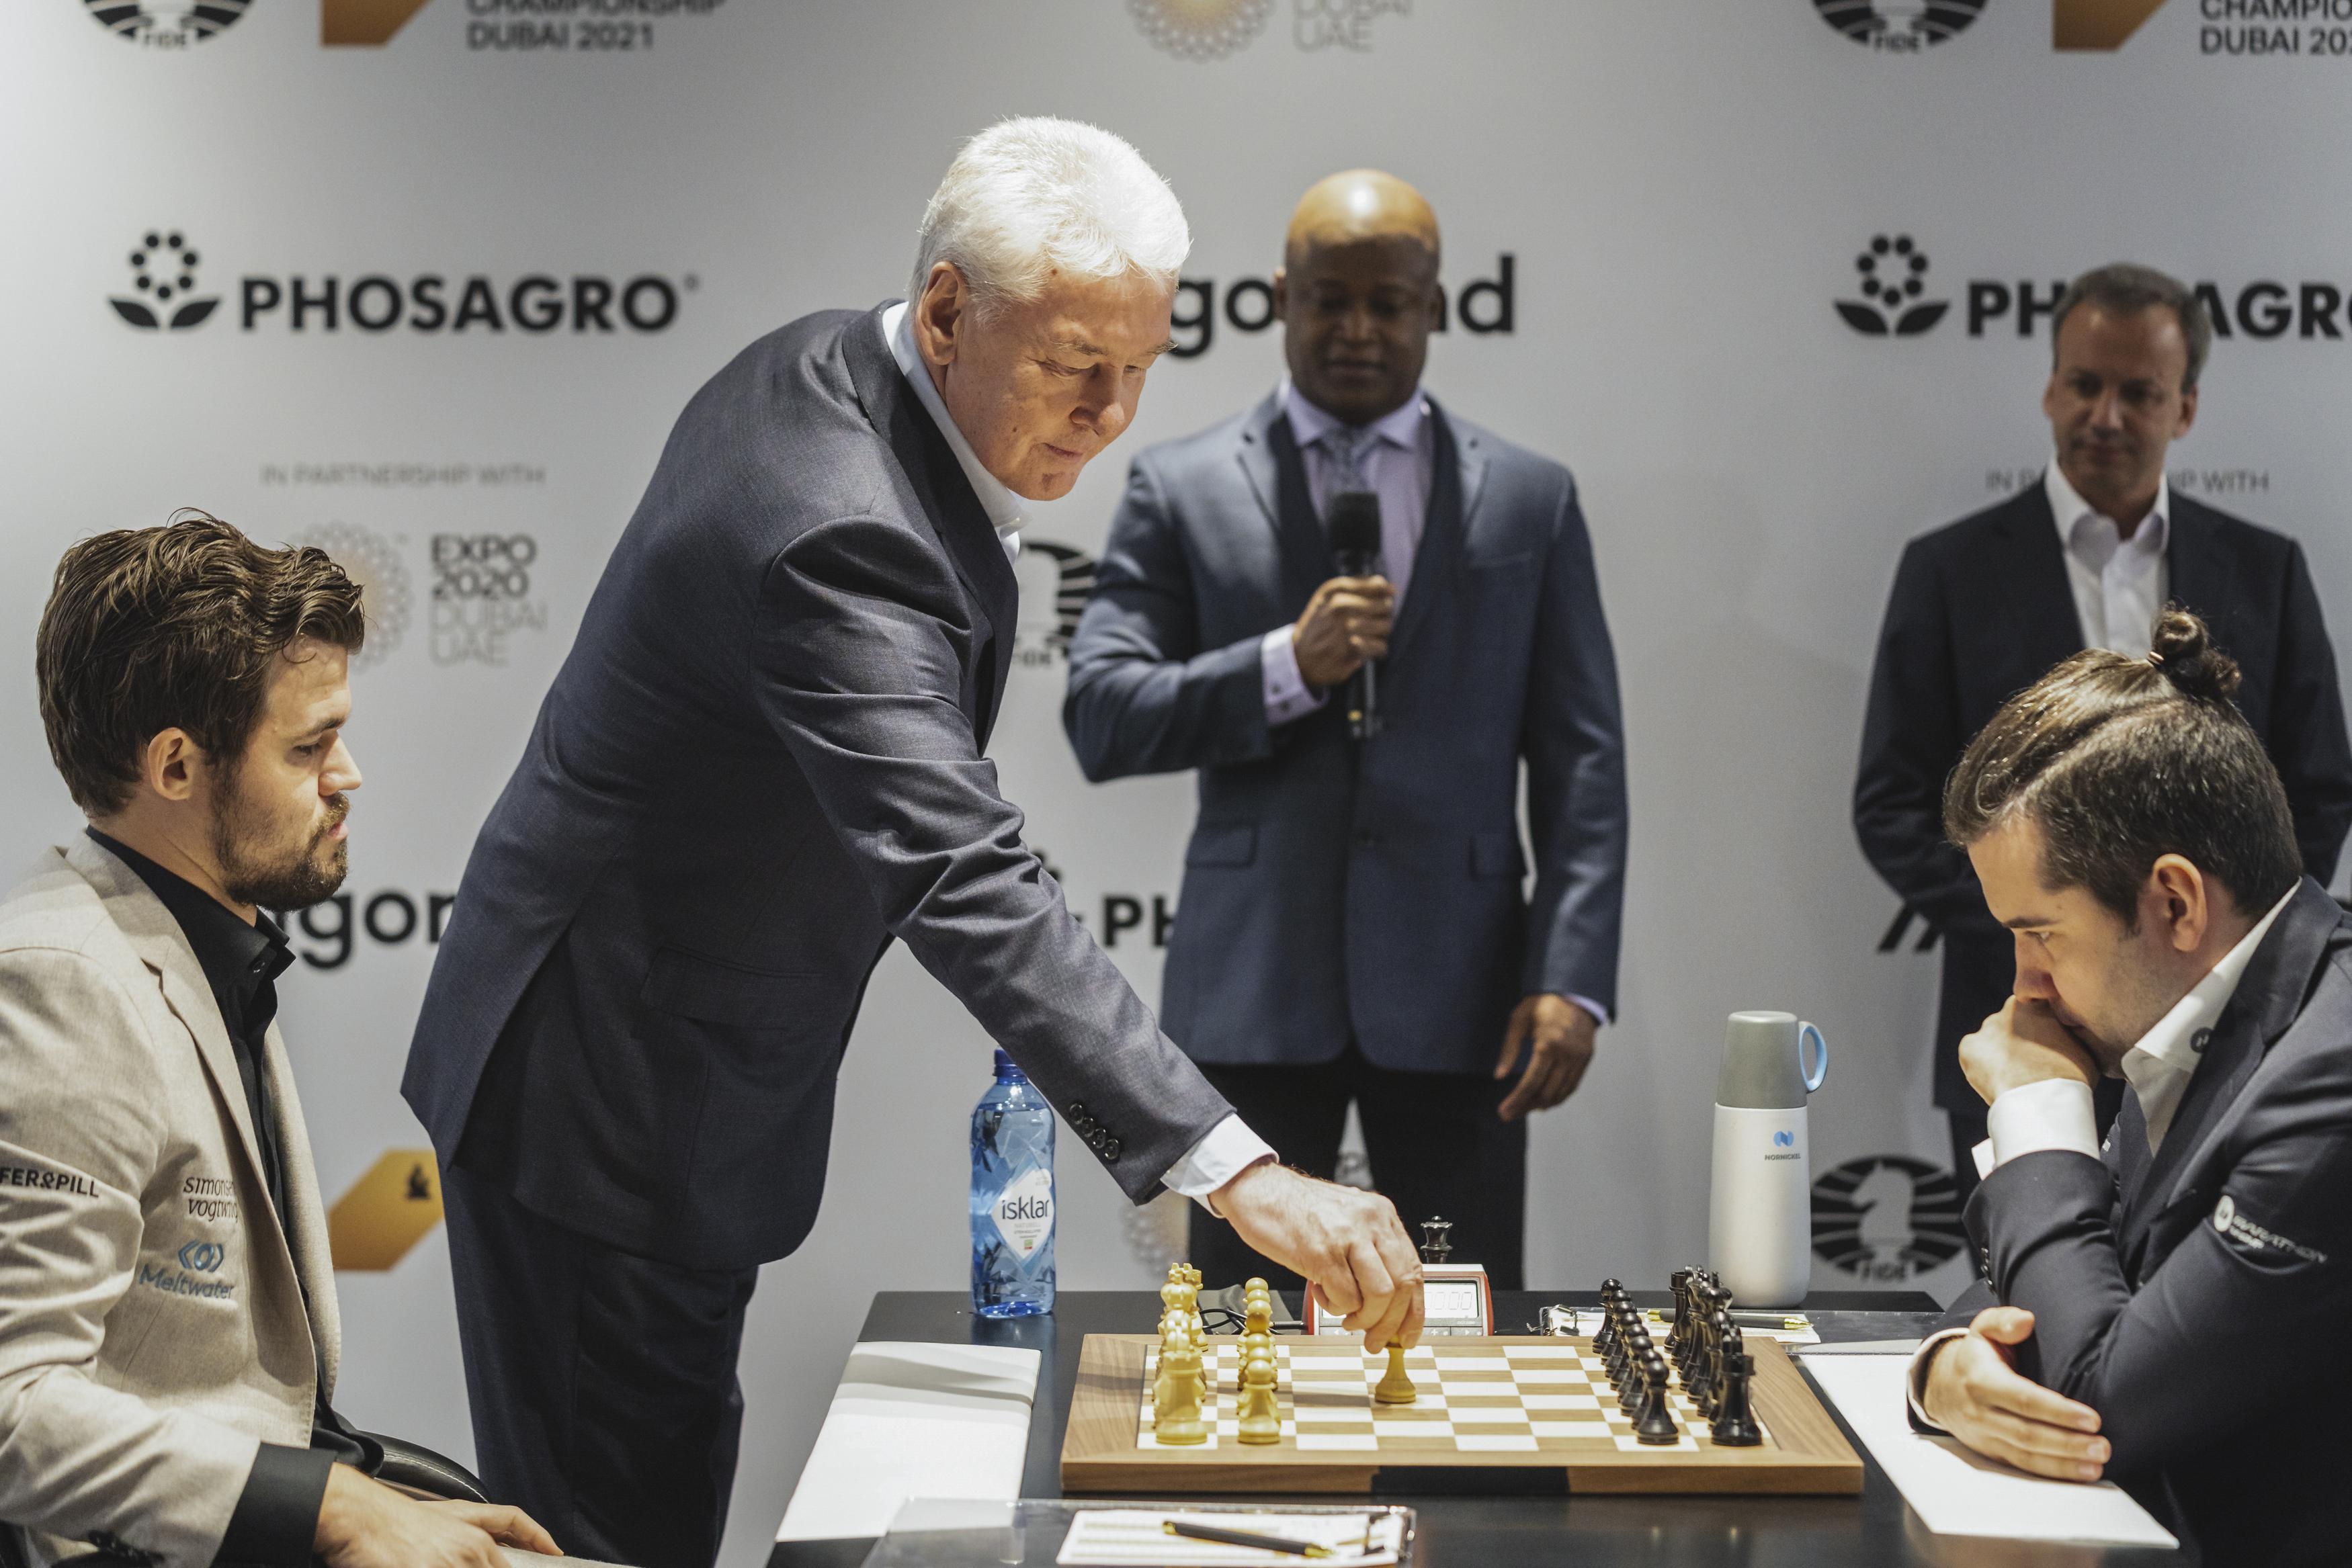 FIDE - International Chess Federation - Game 6 of the FIDE World  Championship starts in one hour. The longest game so far was 58 moves (Game  2). How many games do you